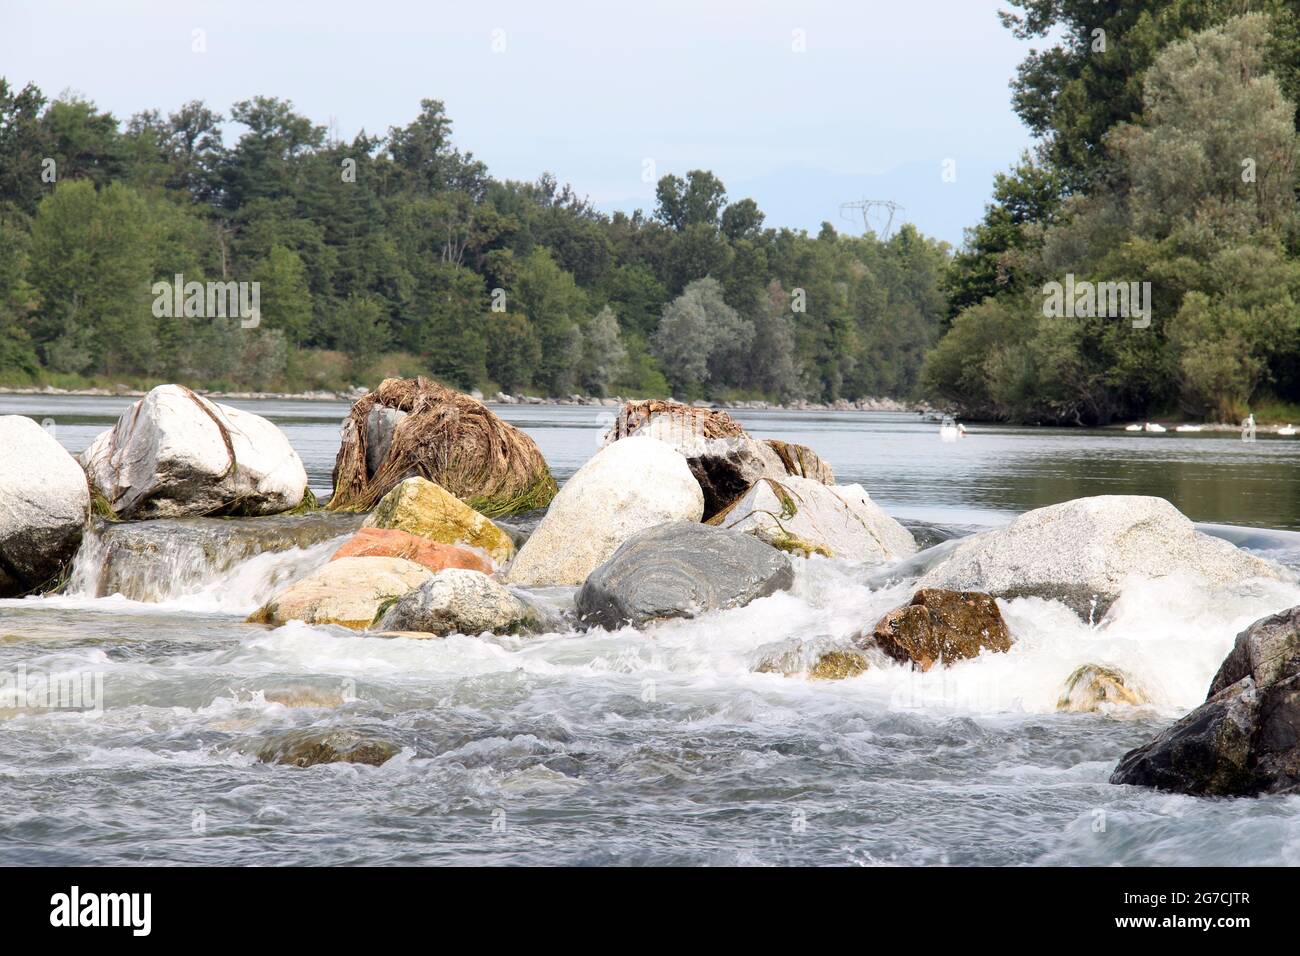 Water Flows between the Stones, Wild Nature of a River between Large Stones Stock Photo